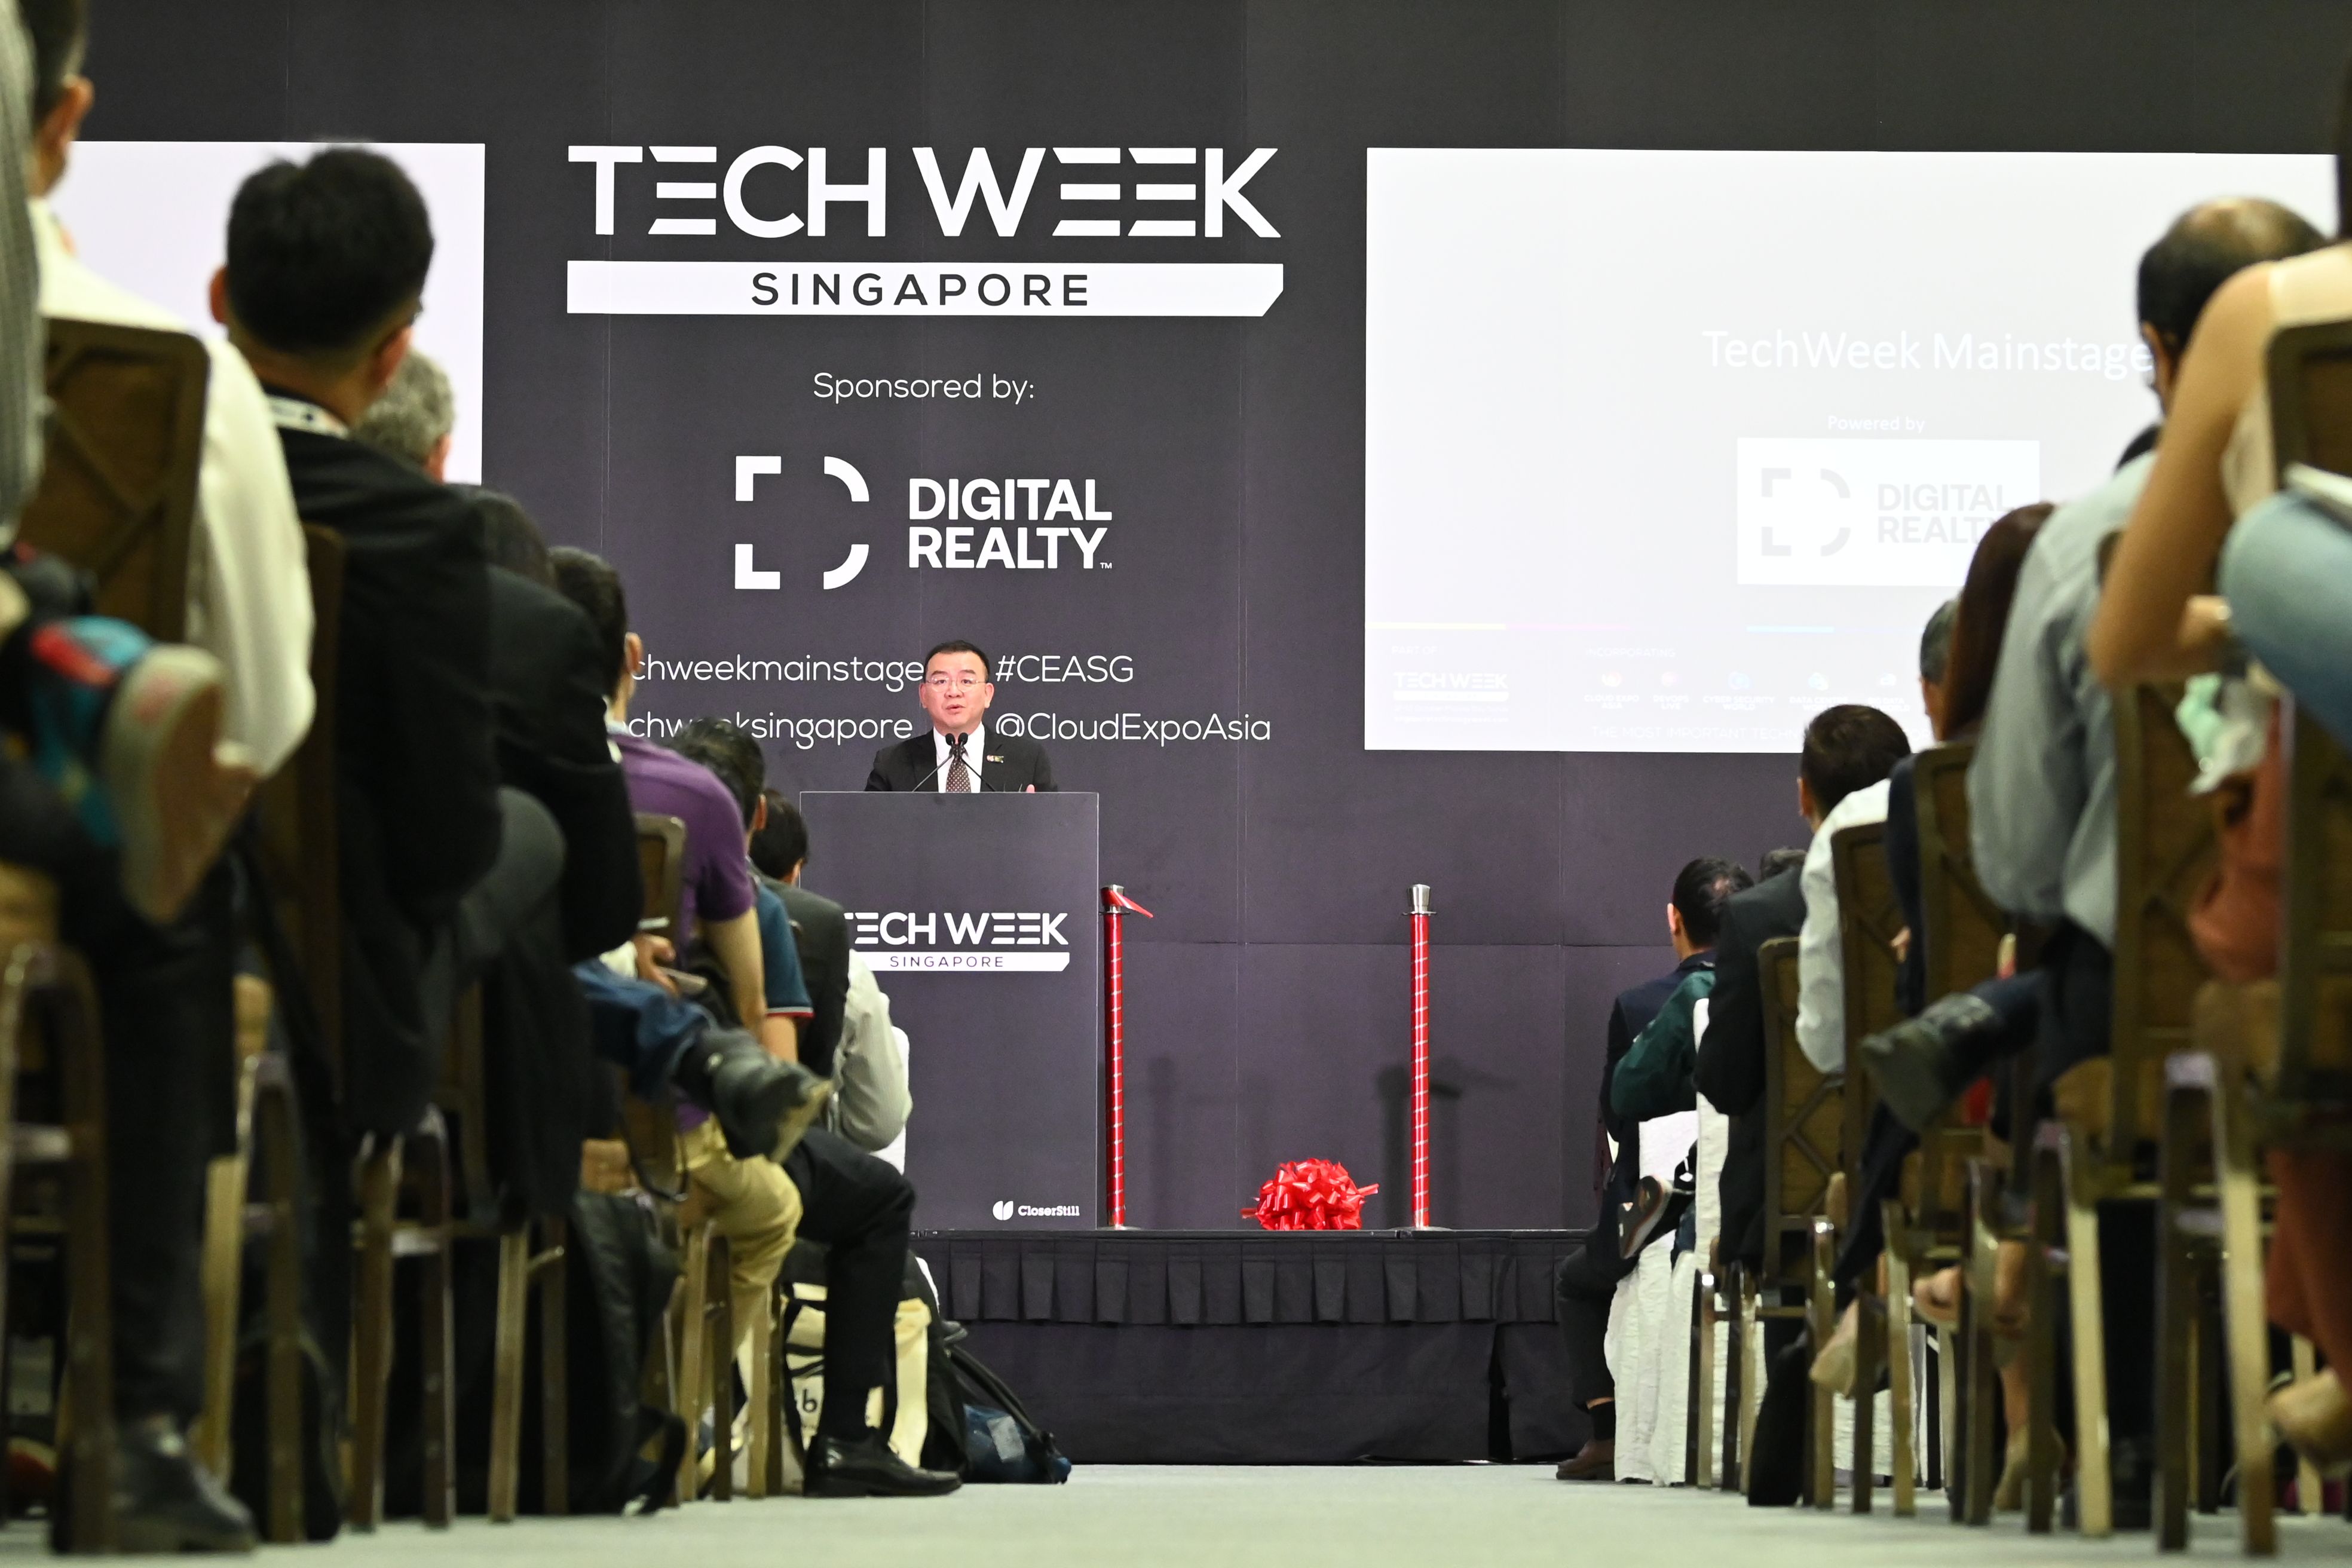 CloserStill Media celebrates successful in-person return of Big Data & AI World, Cloud Expo Asia, and more co-located events presented by Tech Week Singapore